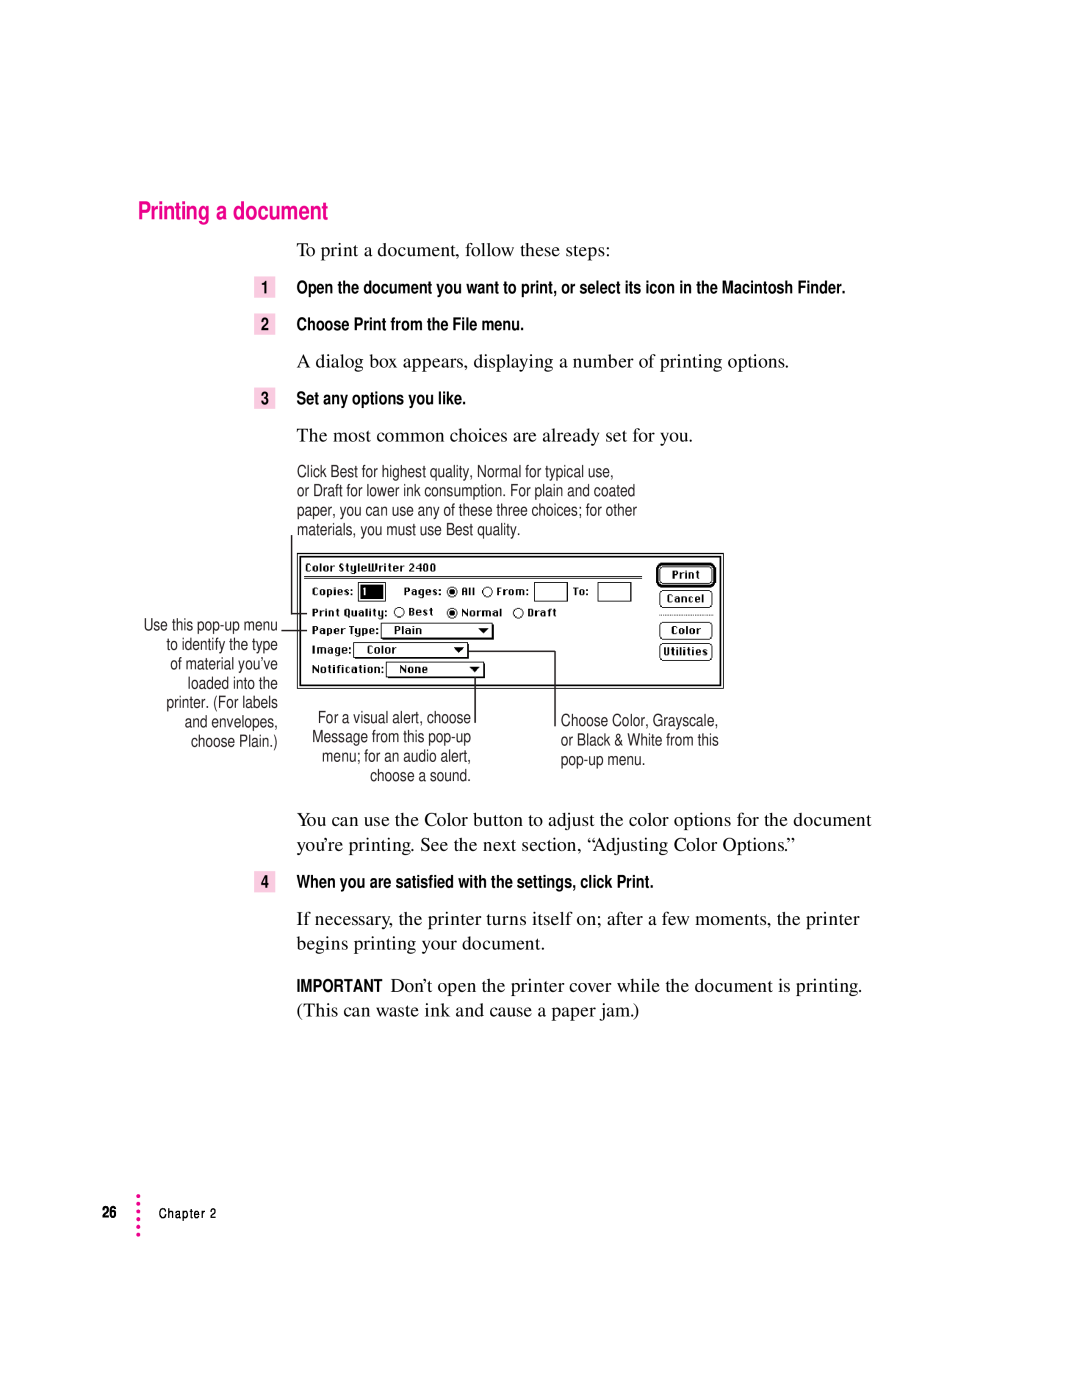 Apple 2400 manual Printing a document 